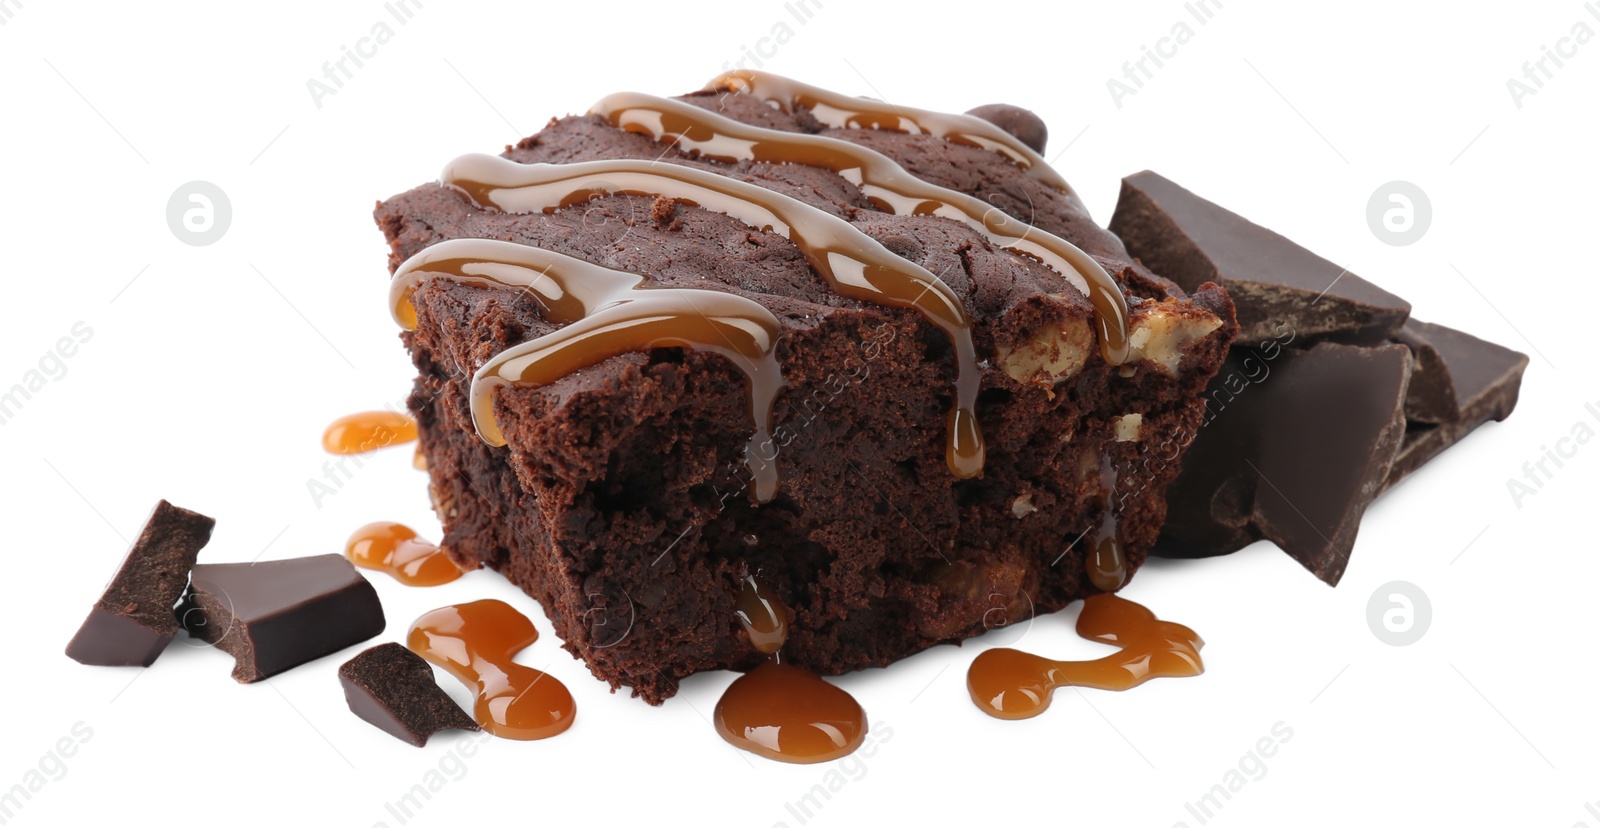 Photo of Delicious chocolate brownie with nuts and caramel sauce on white background